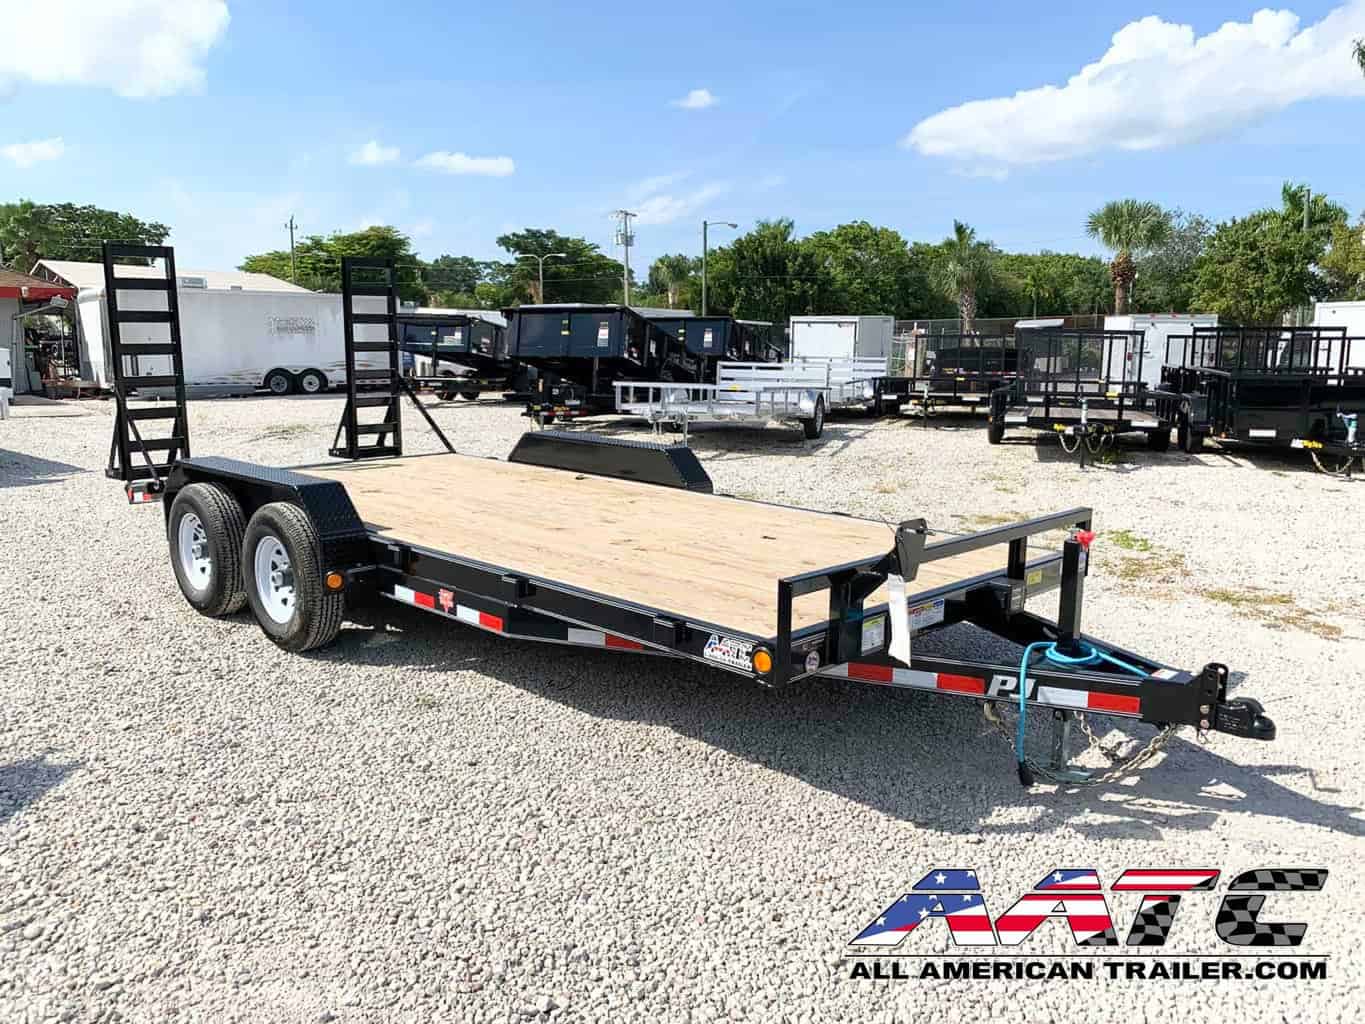 A black PJ 18-foot equipment trailer with a 10,000 GVWR. This PJ Trailer features a straight deck with fold-up ramps, providing a load capacity of 7060 lbs. It is designed for bumper pull hitch type towing and equipped with electric brakes for added safety. The trailer is perfect for hauling various equipment and cargo, and it's from the renowned PJ Trailers brand.